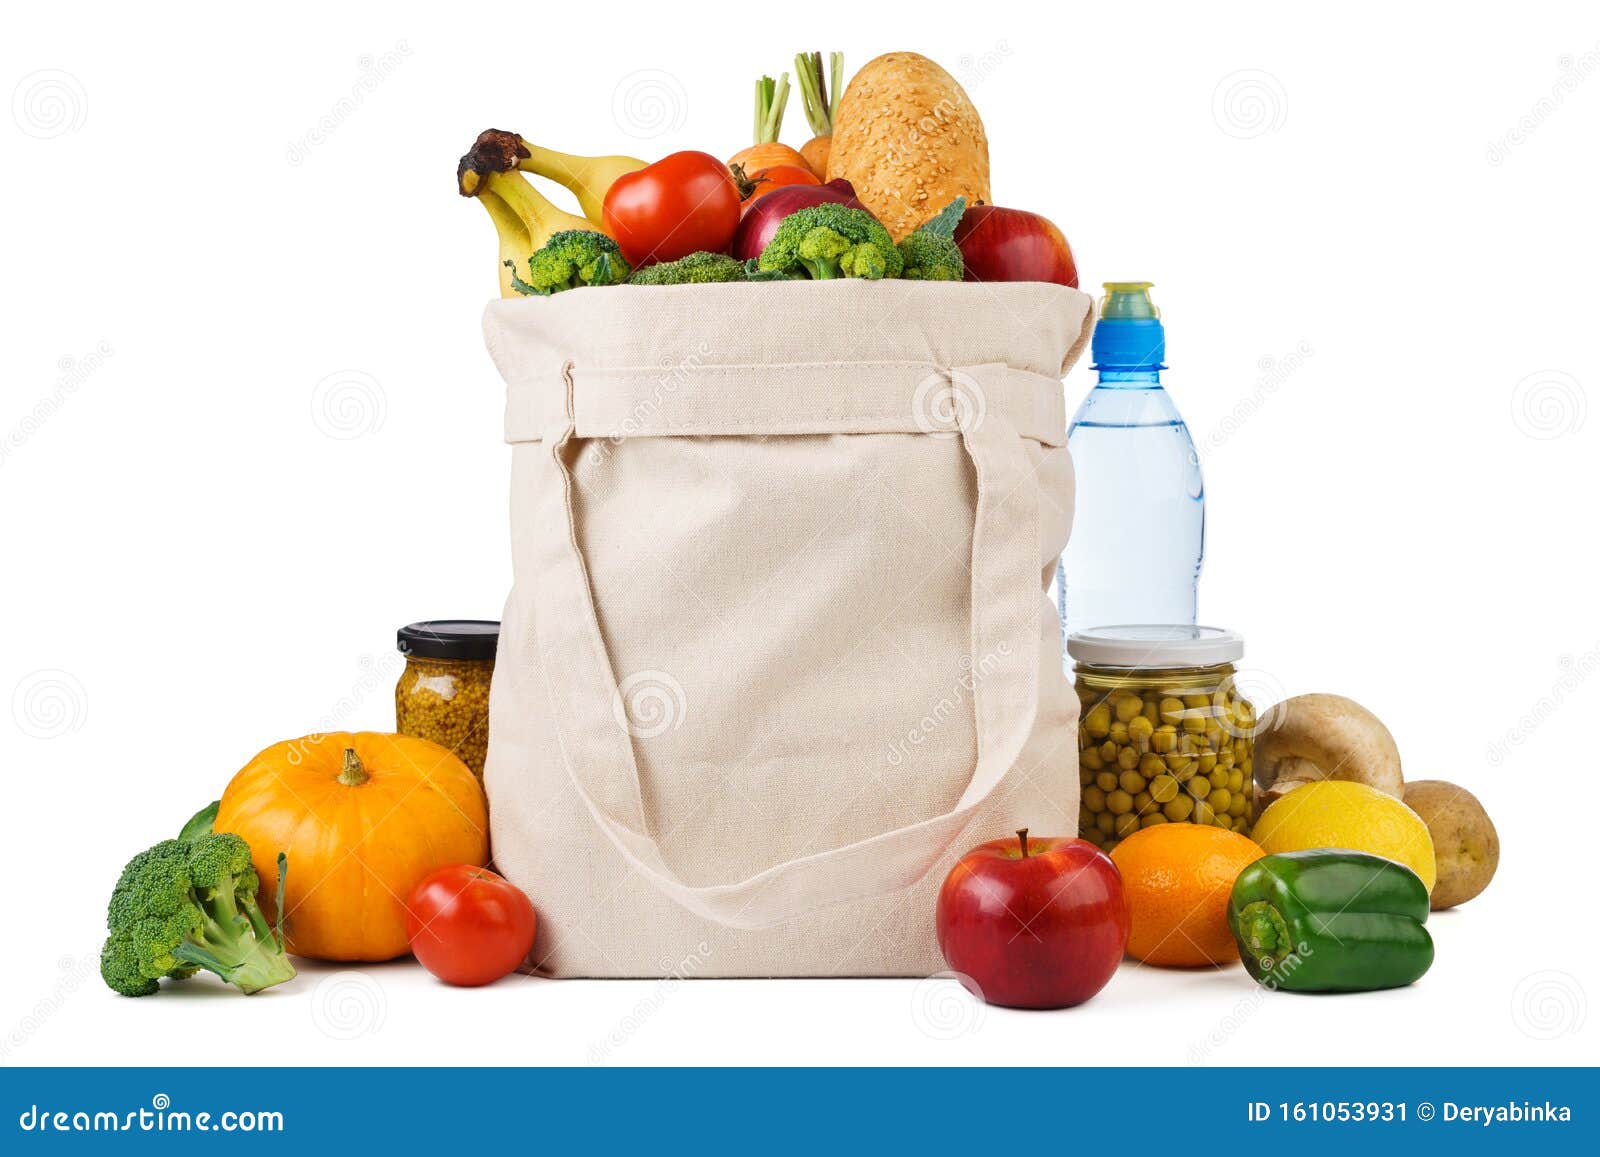 https://thumbs.dreamstime.com/z/reusable-shopping-tote-bag-full-various-groceries-fruits-vegetables-bread-isolated-white-background-food-grocery-textile-161053931.jpg